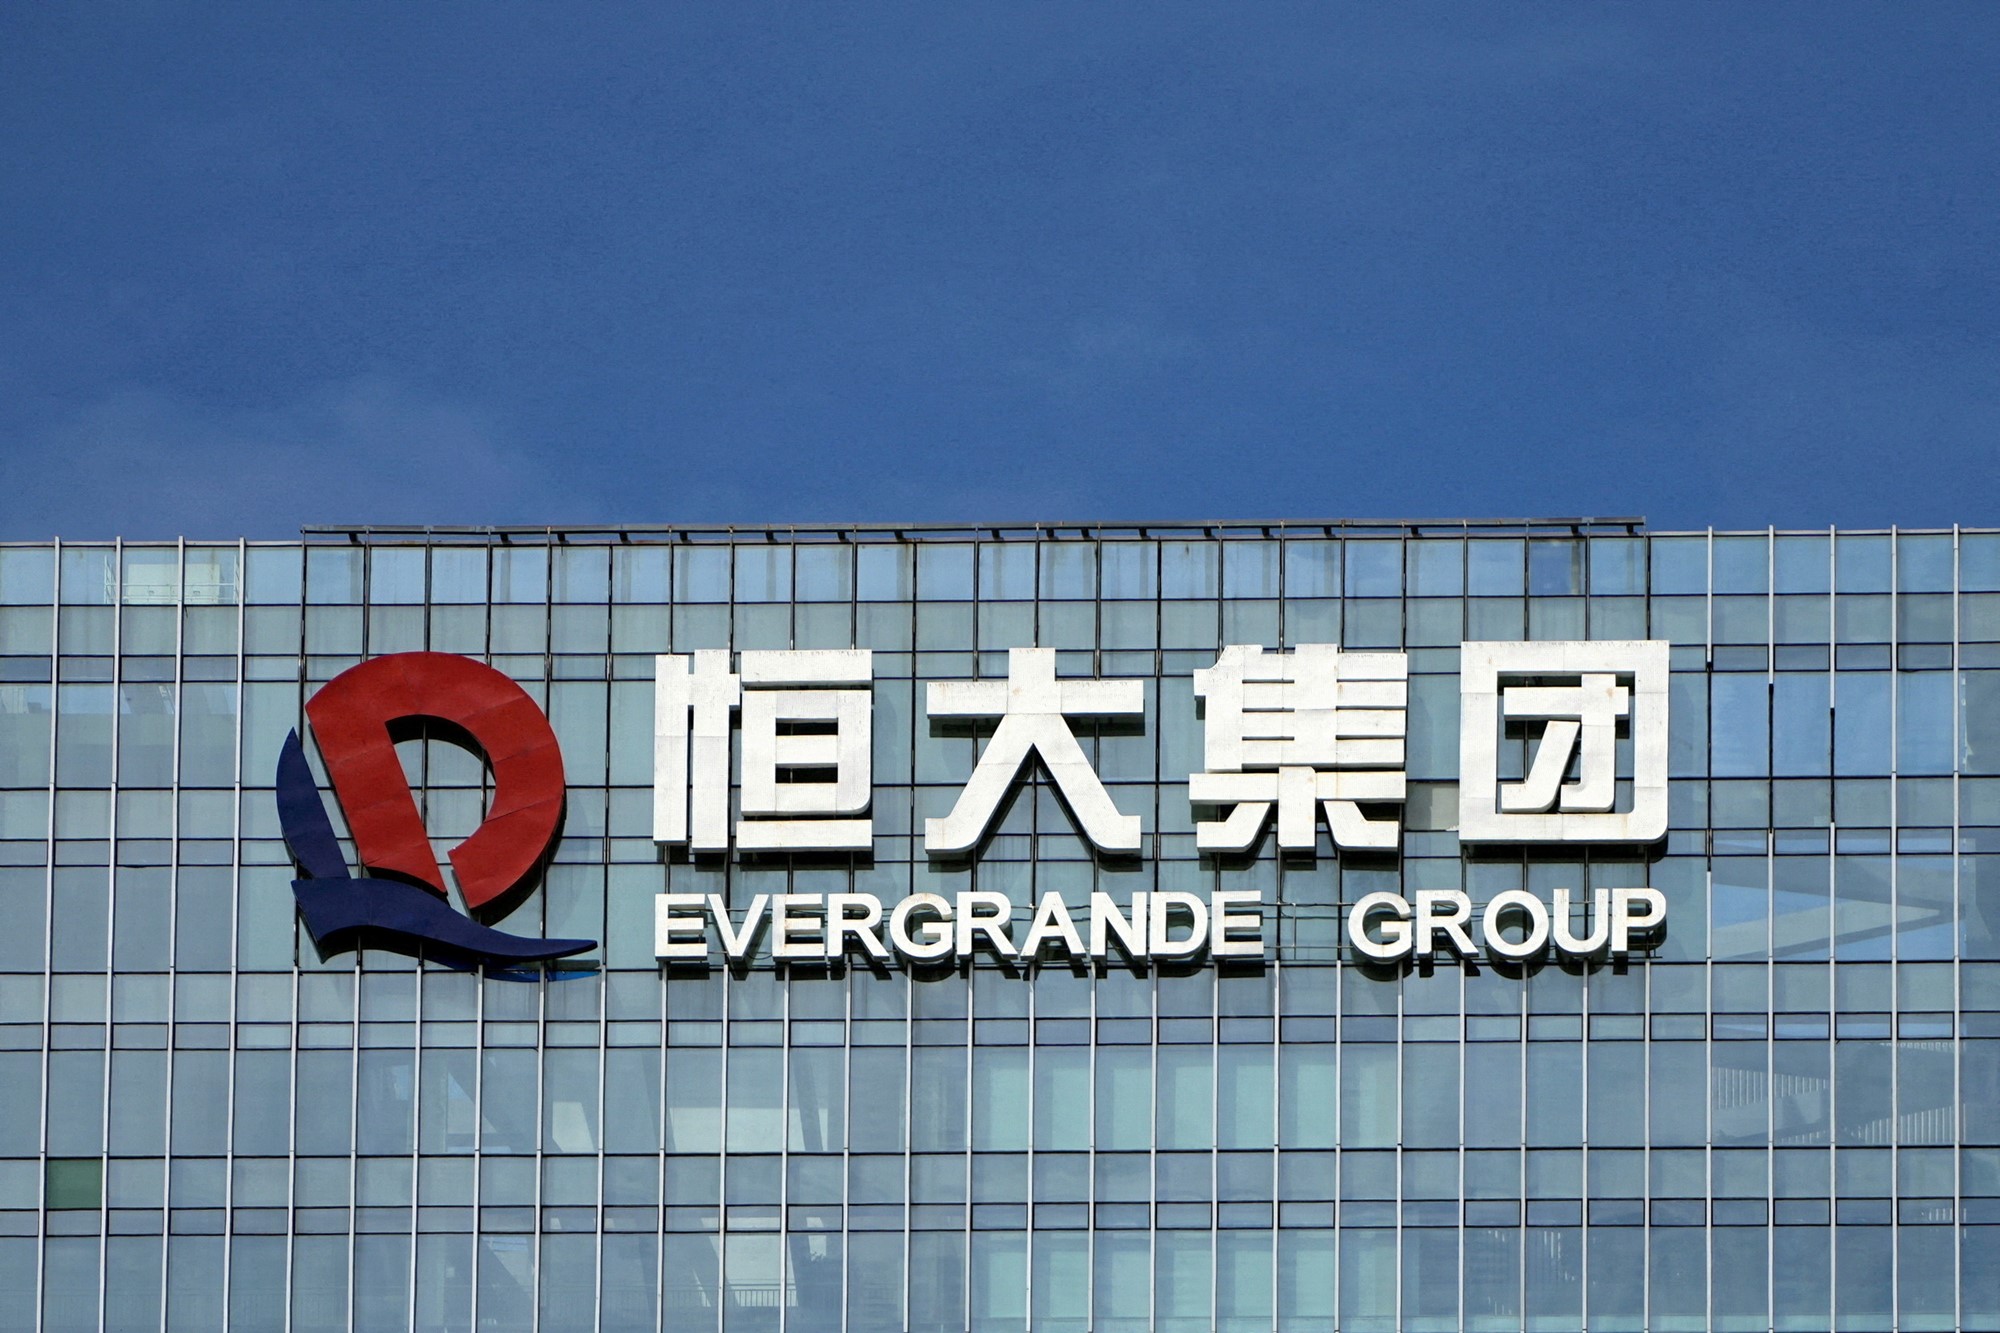 A company logo that reads 'Evergrande Group' with Chinese characters above it, suspended on the side of a large glass office building.